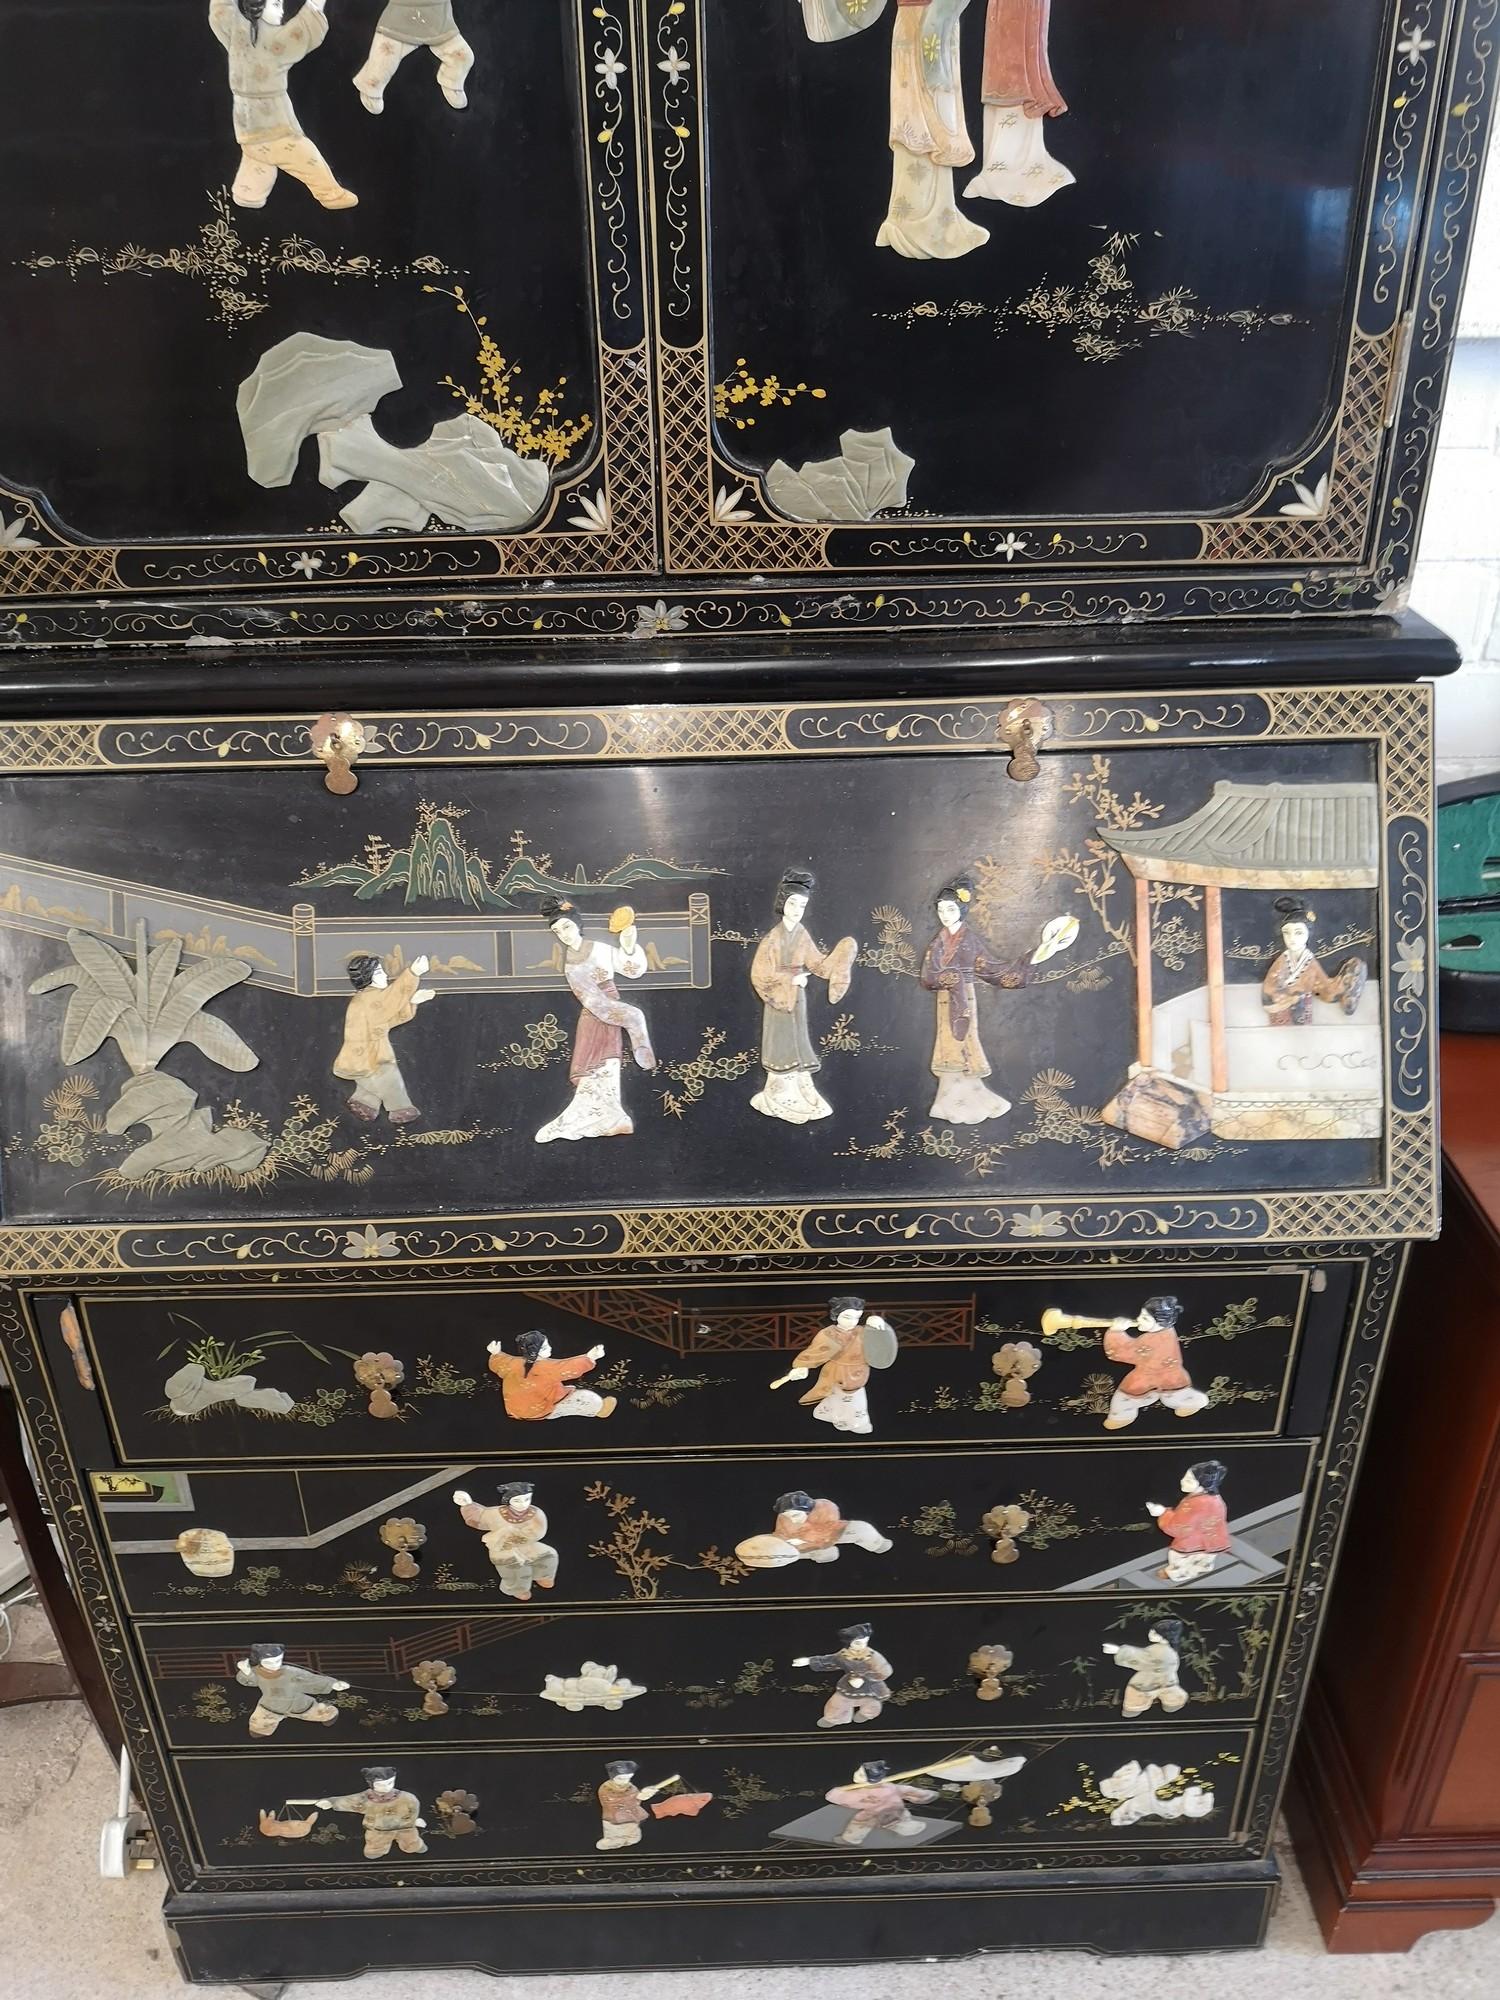 Chinoissere 2 section Oriental bureau book case with mother of pearl inlays etc. - Image 5 of 6